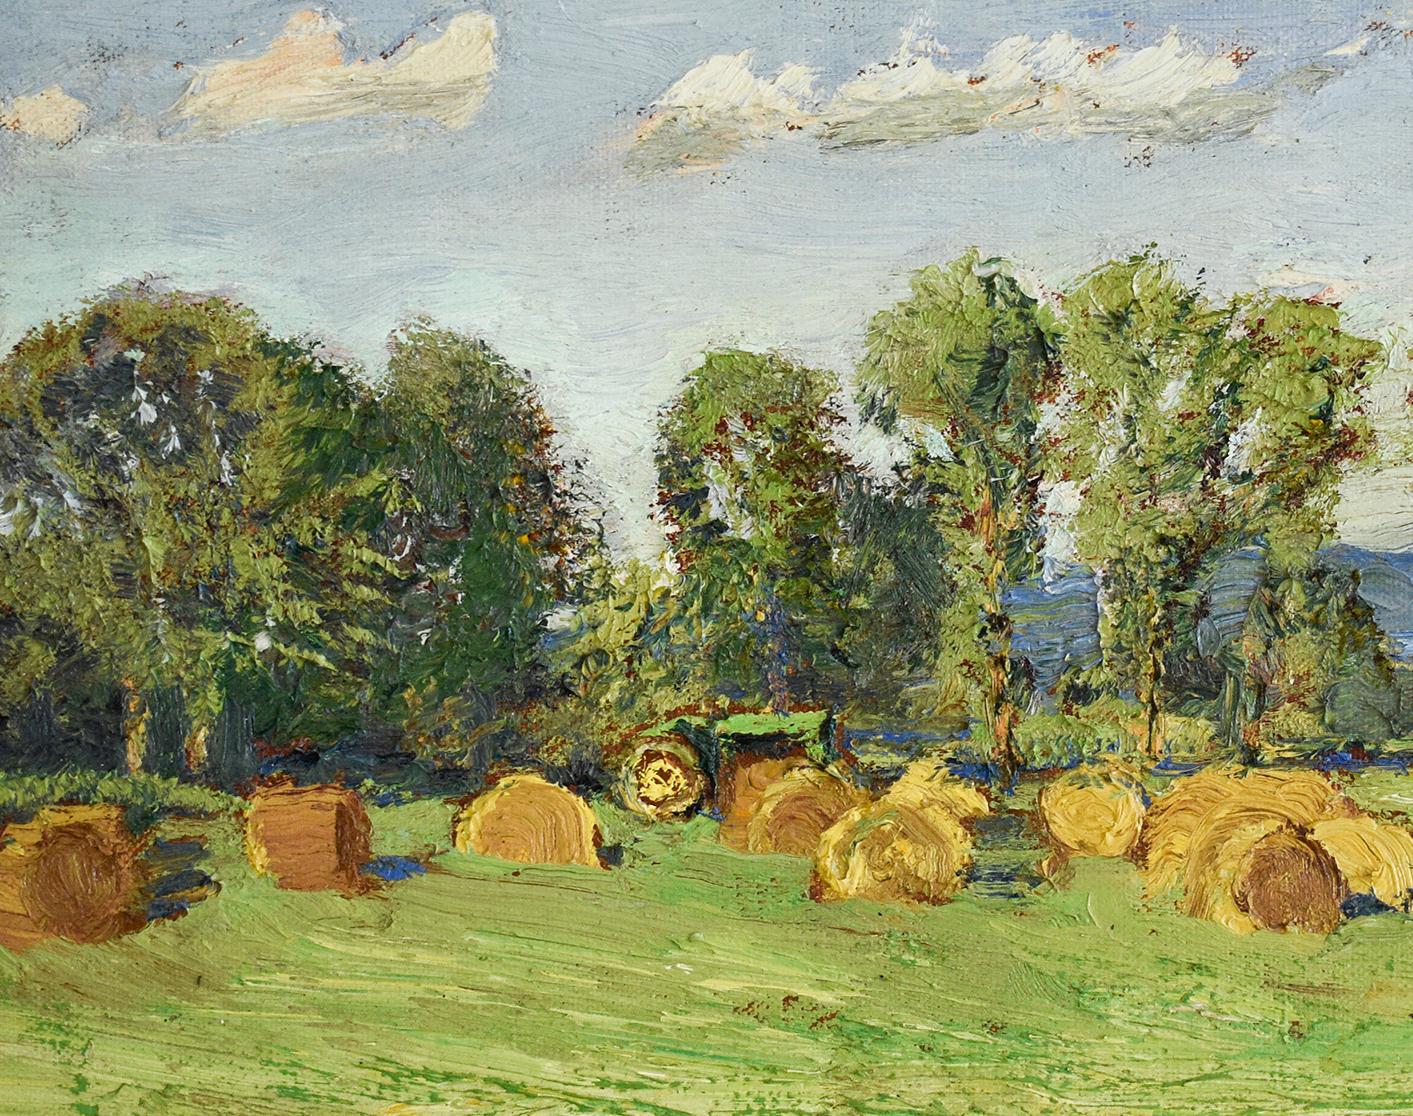 Impressionistic, en plein air summer landscape of a rural green farm field with yellow hay stacks under a blue sky
oil on linen mounted on homasote board, ready to hang as is 
13 x 20 inches unframed 
Signed lower right corner

Harry Orlyk is